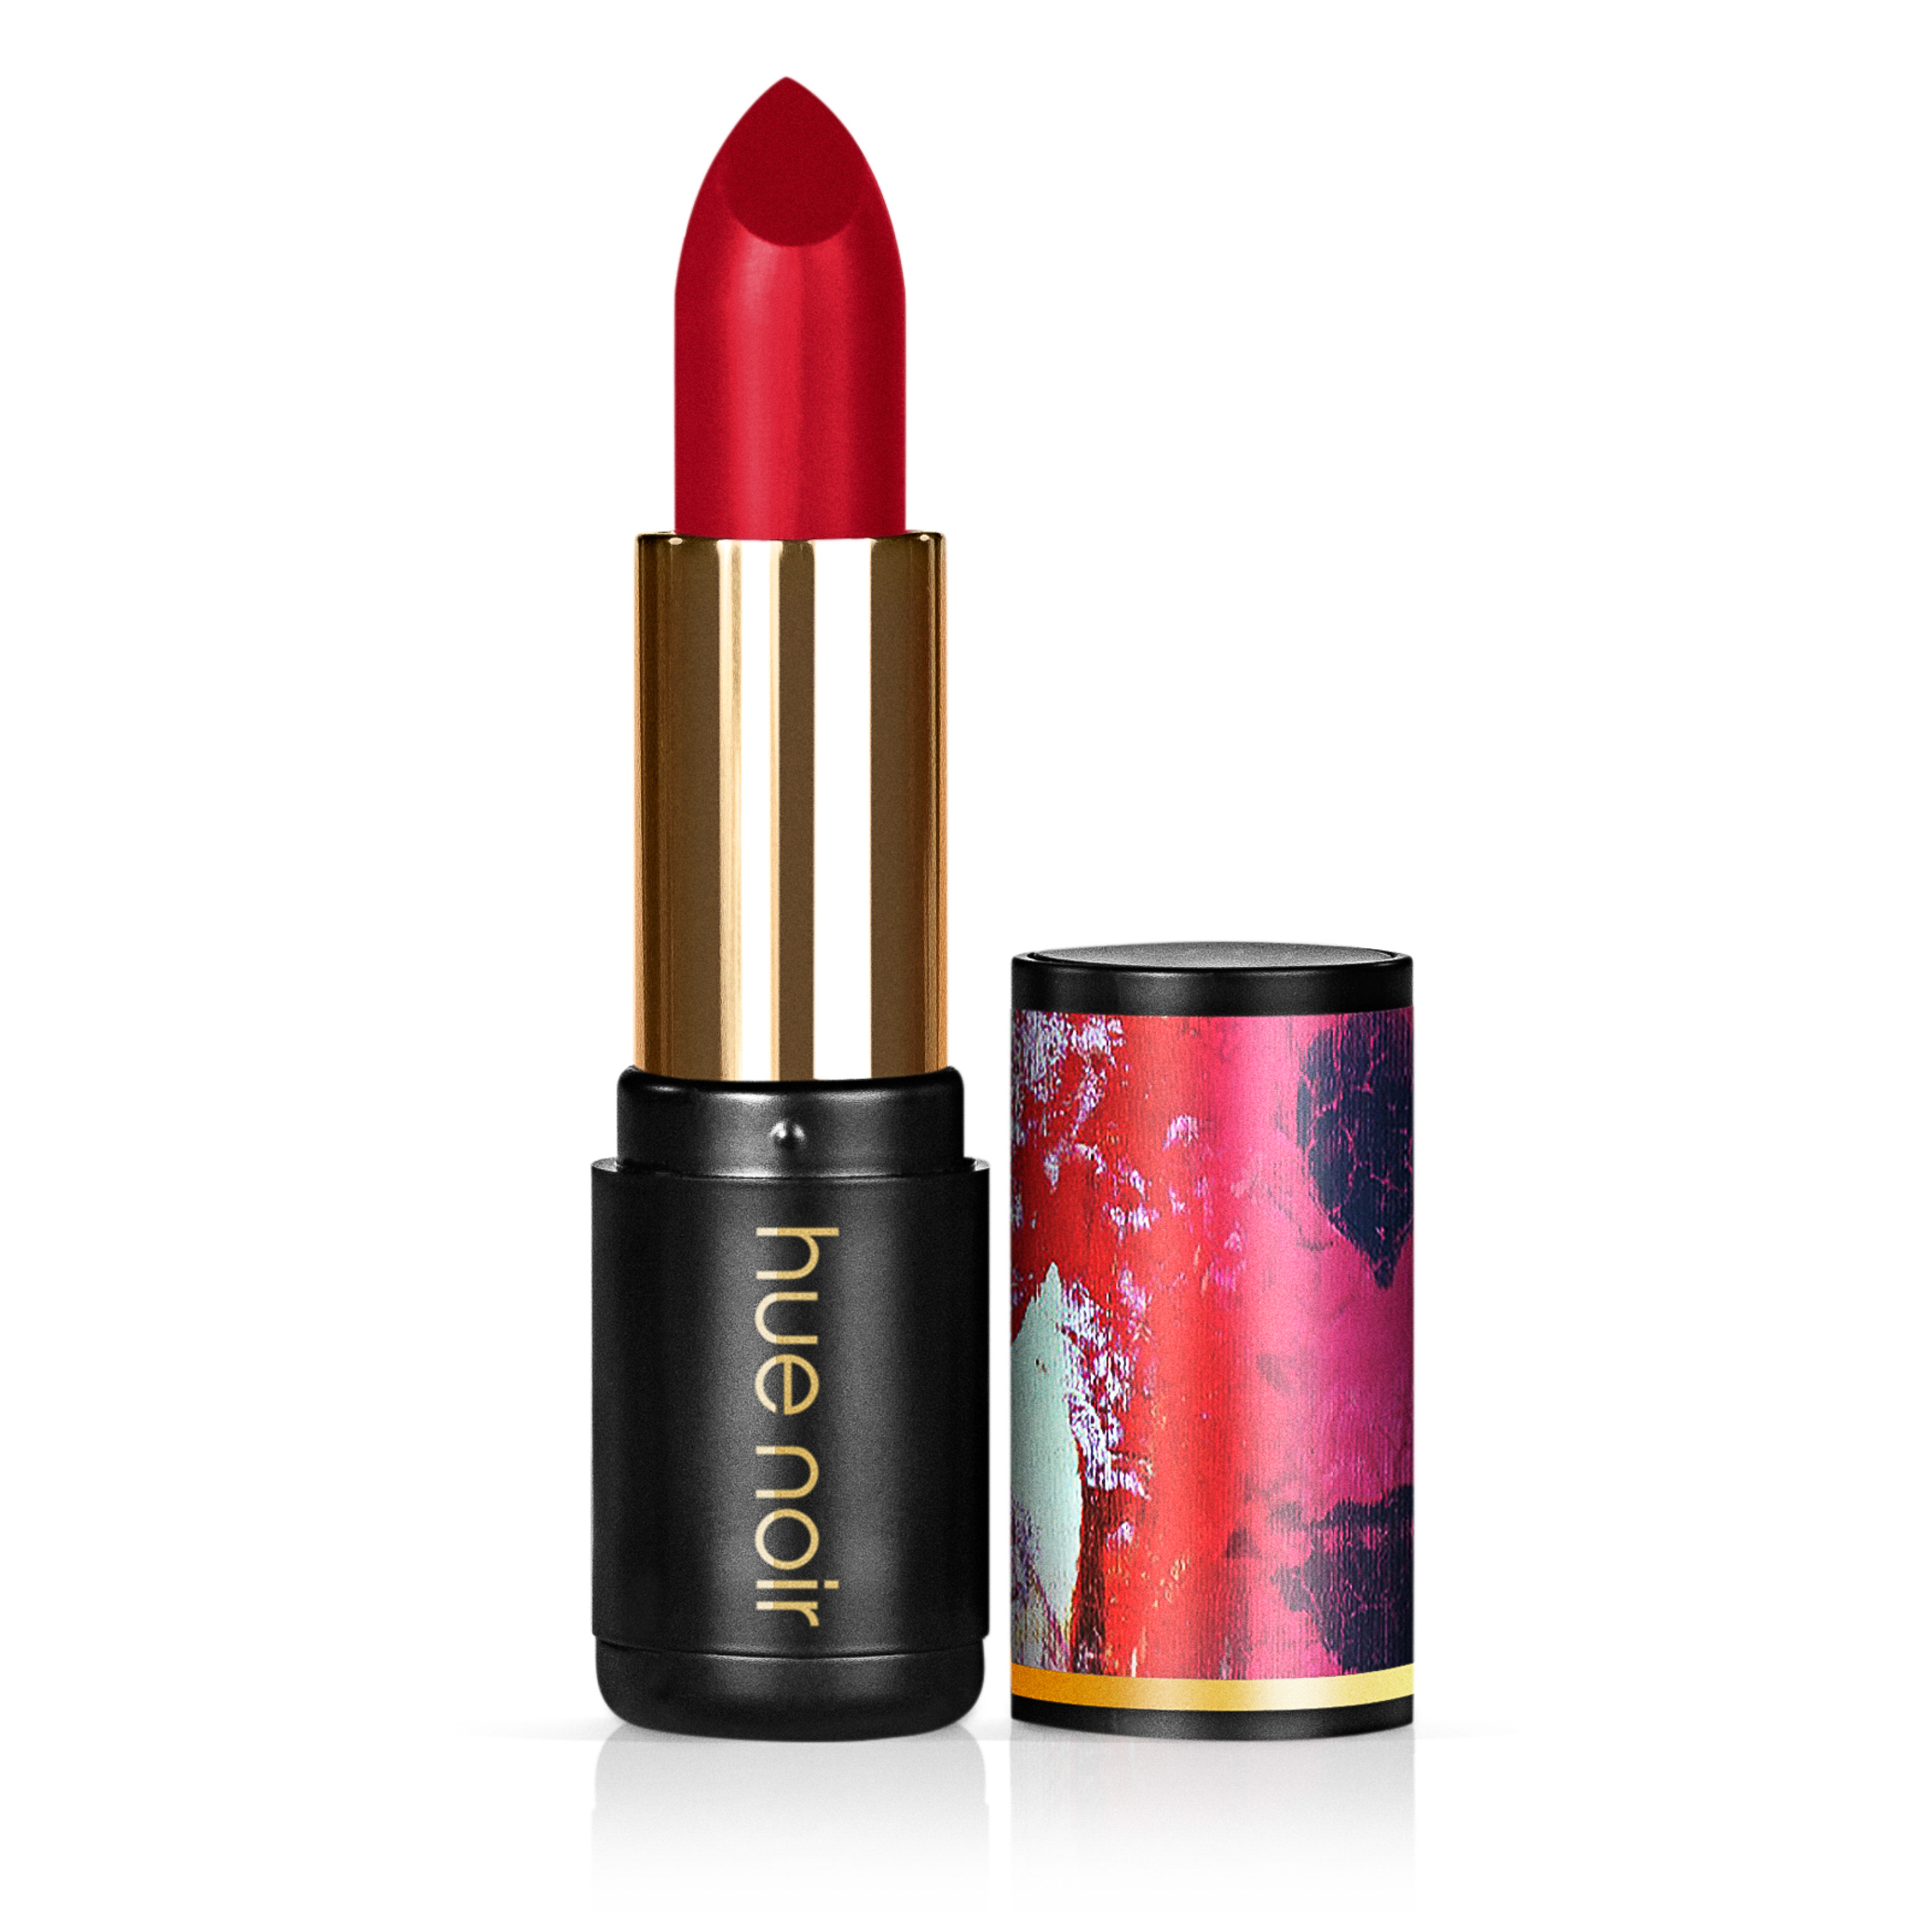 Hue Noir Limited-Edition Lipstick in Hail to the Queen